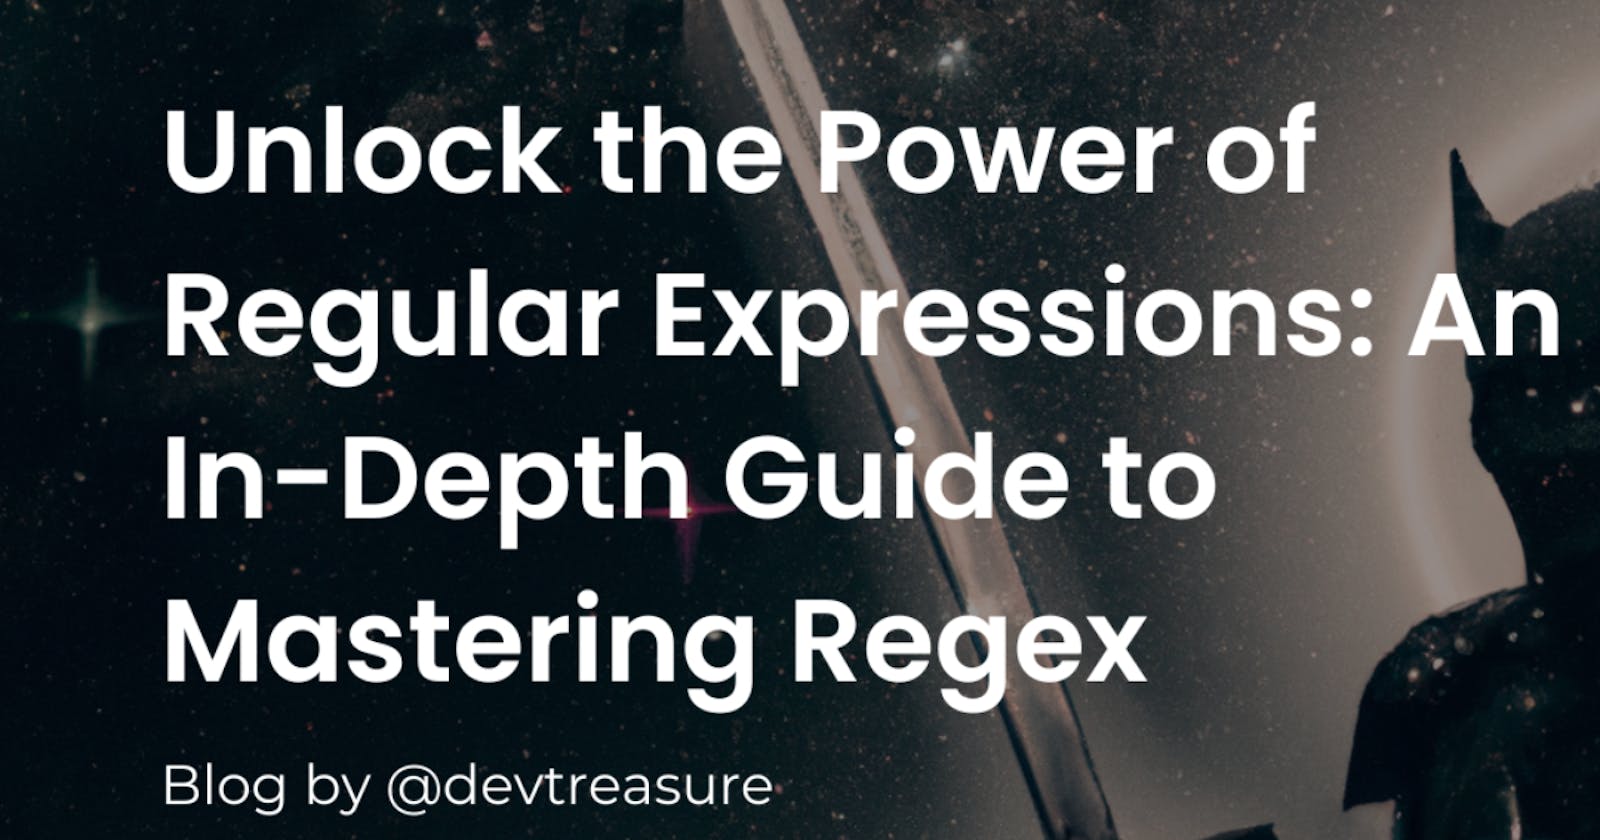 Unlock the Power of Regular Expressions: An In-Depth Guide to Mastering Regex